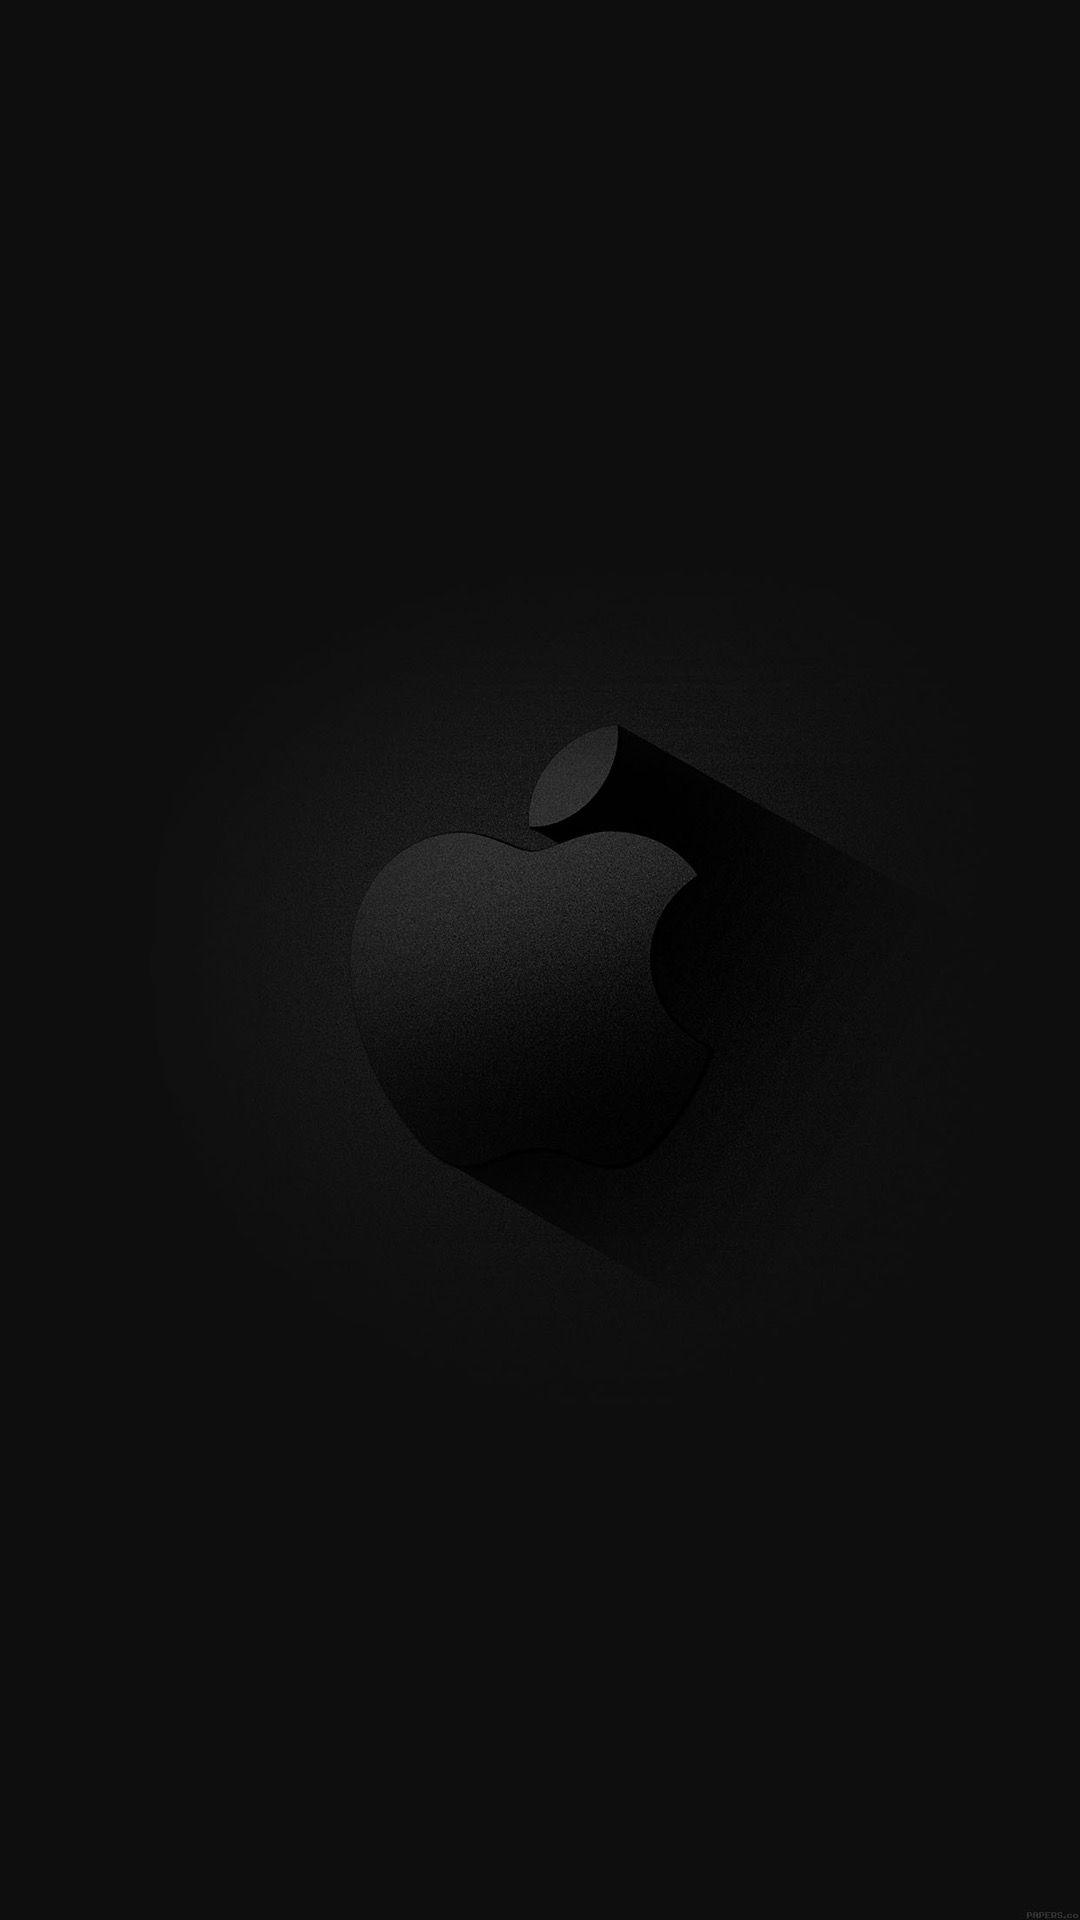 Black Apple iPhone Wallpapers - Top Free Black Apple iPhone Backgrounds -  WallpaperAccess